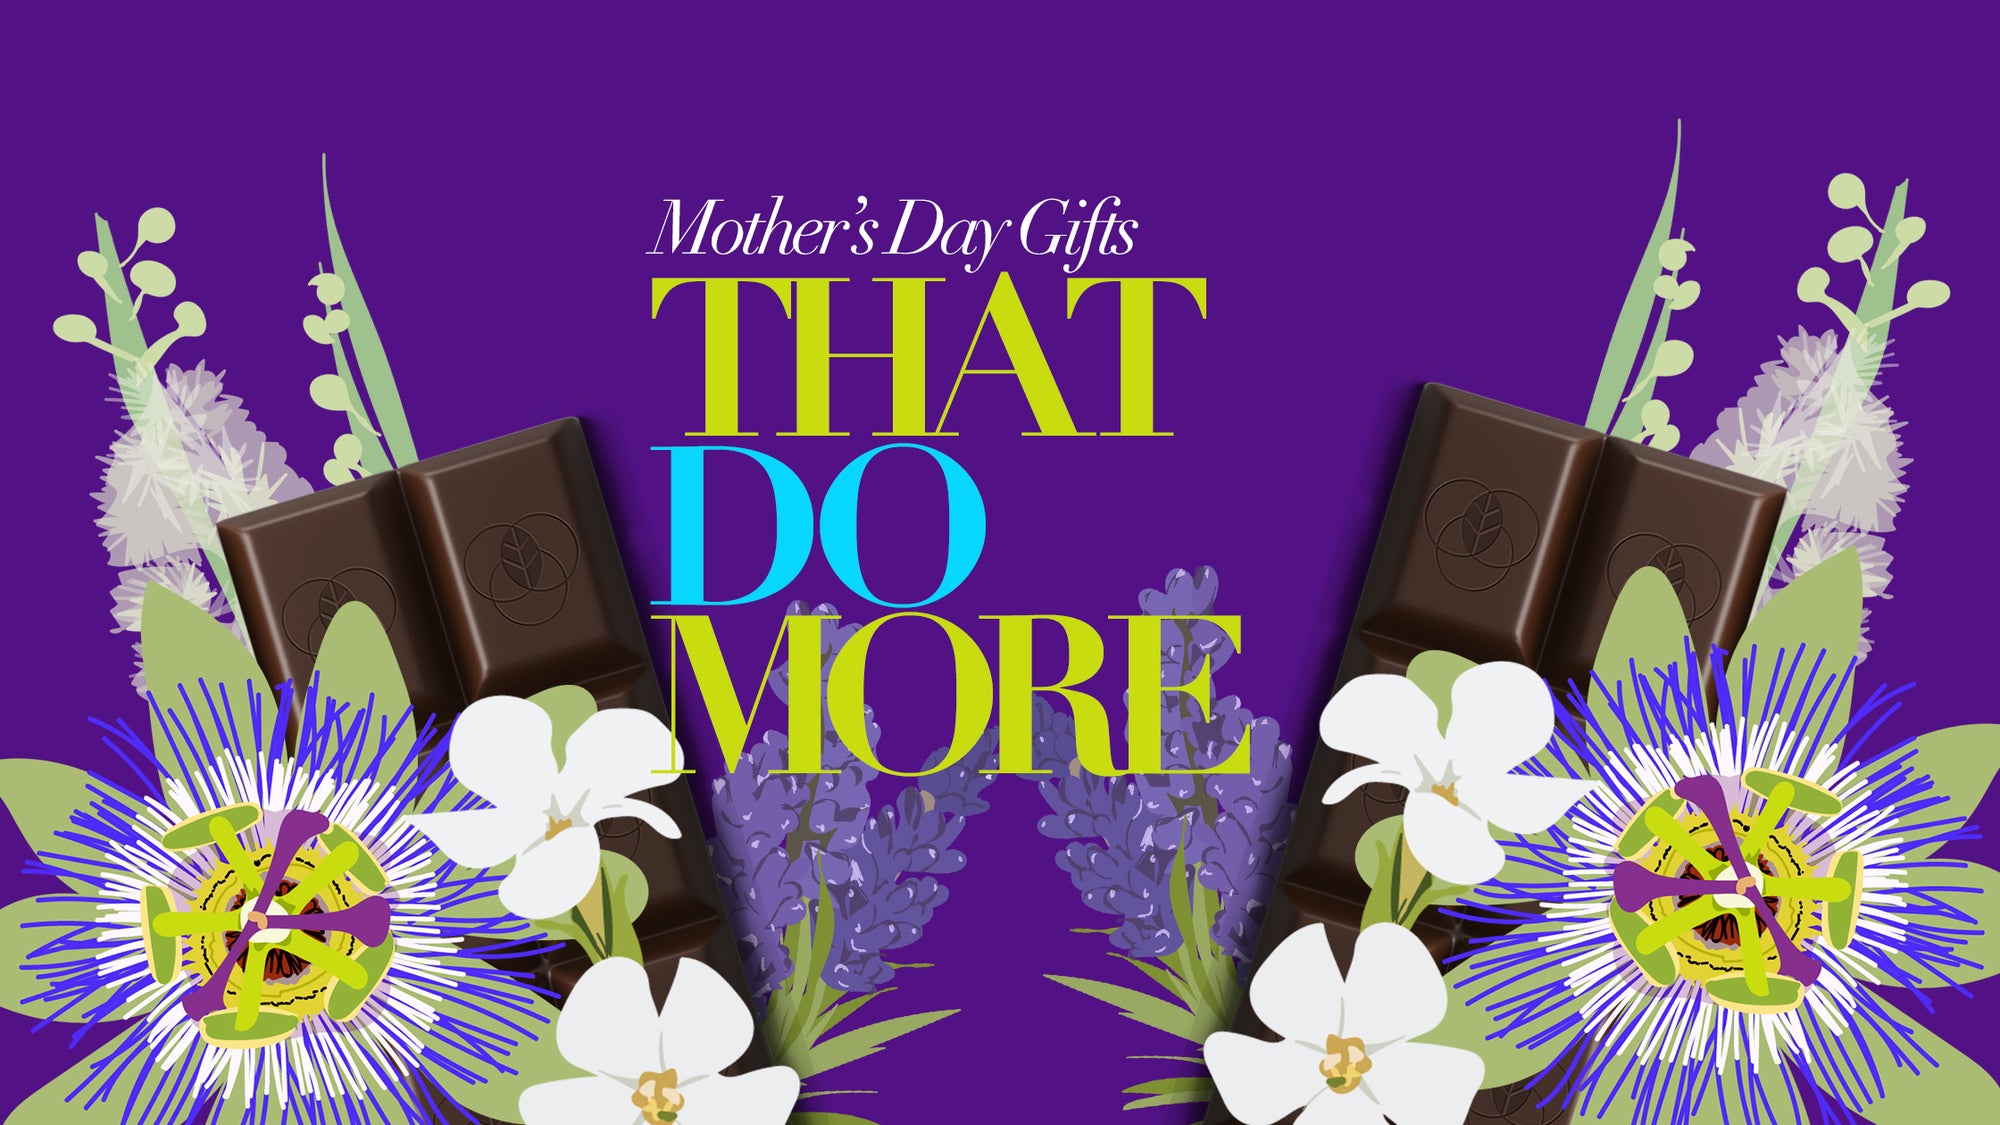 The Functional Chocolate Company discusses Mother’s Day gift ideas that have positive impacts on the planet and humanity.